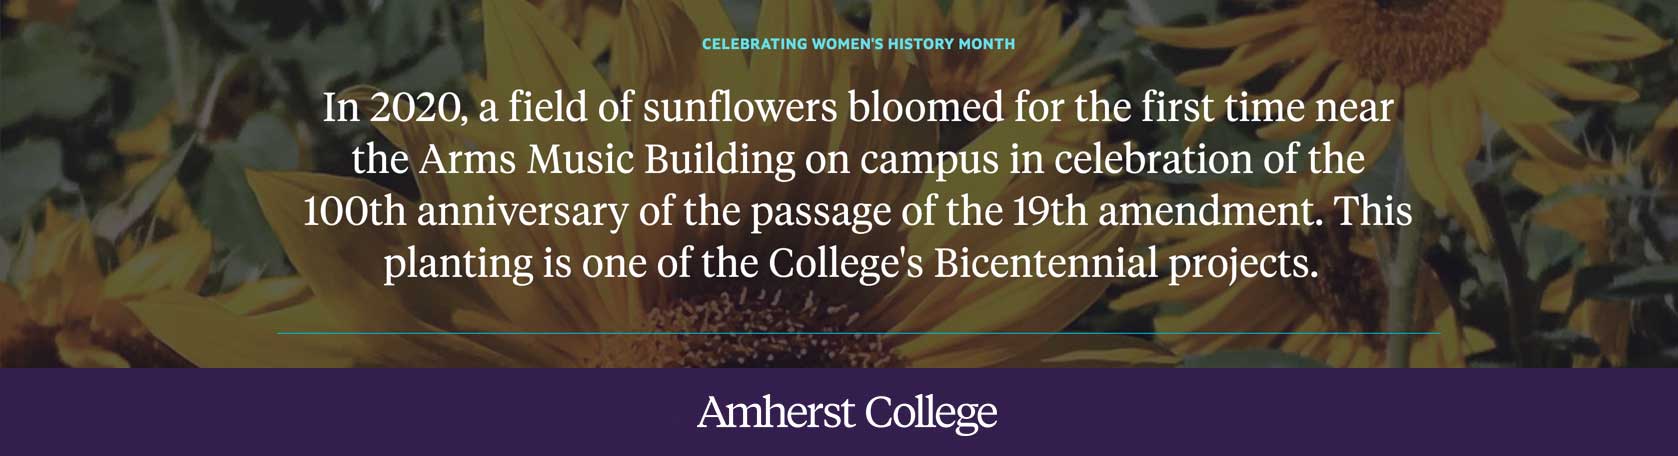 In 2020 a field of sunflowers was planted on campus to celebrate the 100th anniversary of the passage of the 19th amendment